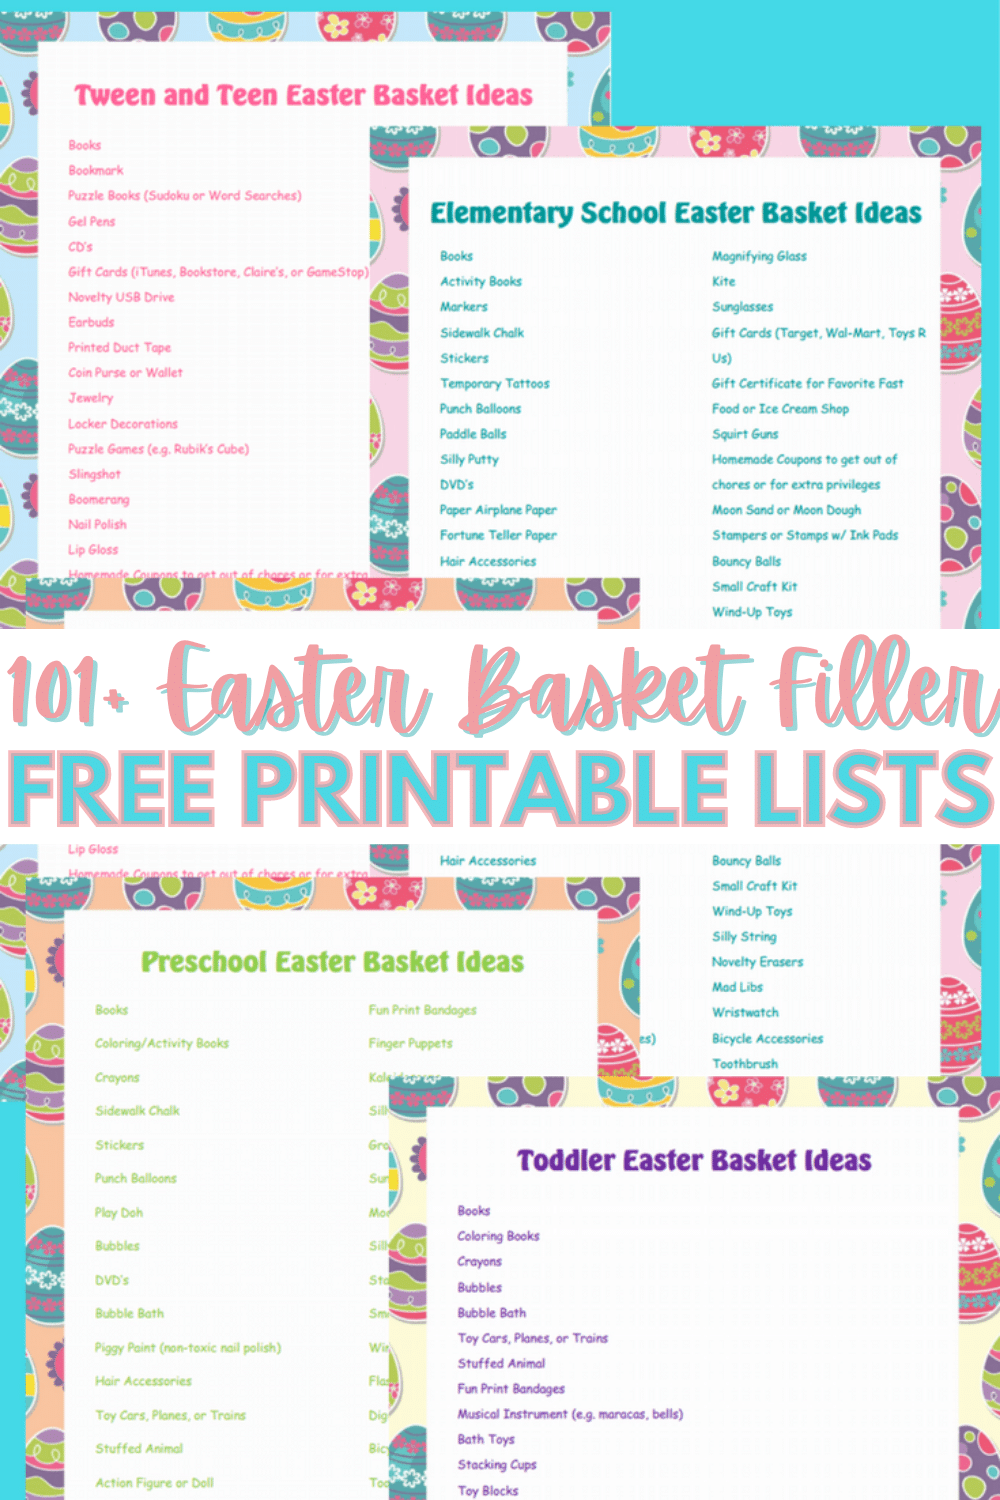 Over 100 Easter ideas for basket fillers plus ideas for decorating and organizing. There are four printable lists of ideas for toddlers through teens. #easter #easterbasket #freeprintable #easterbasketideas via @wondermomwannab